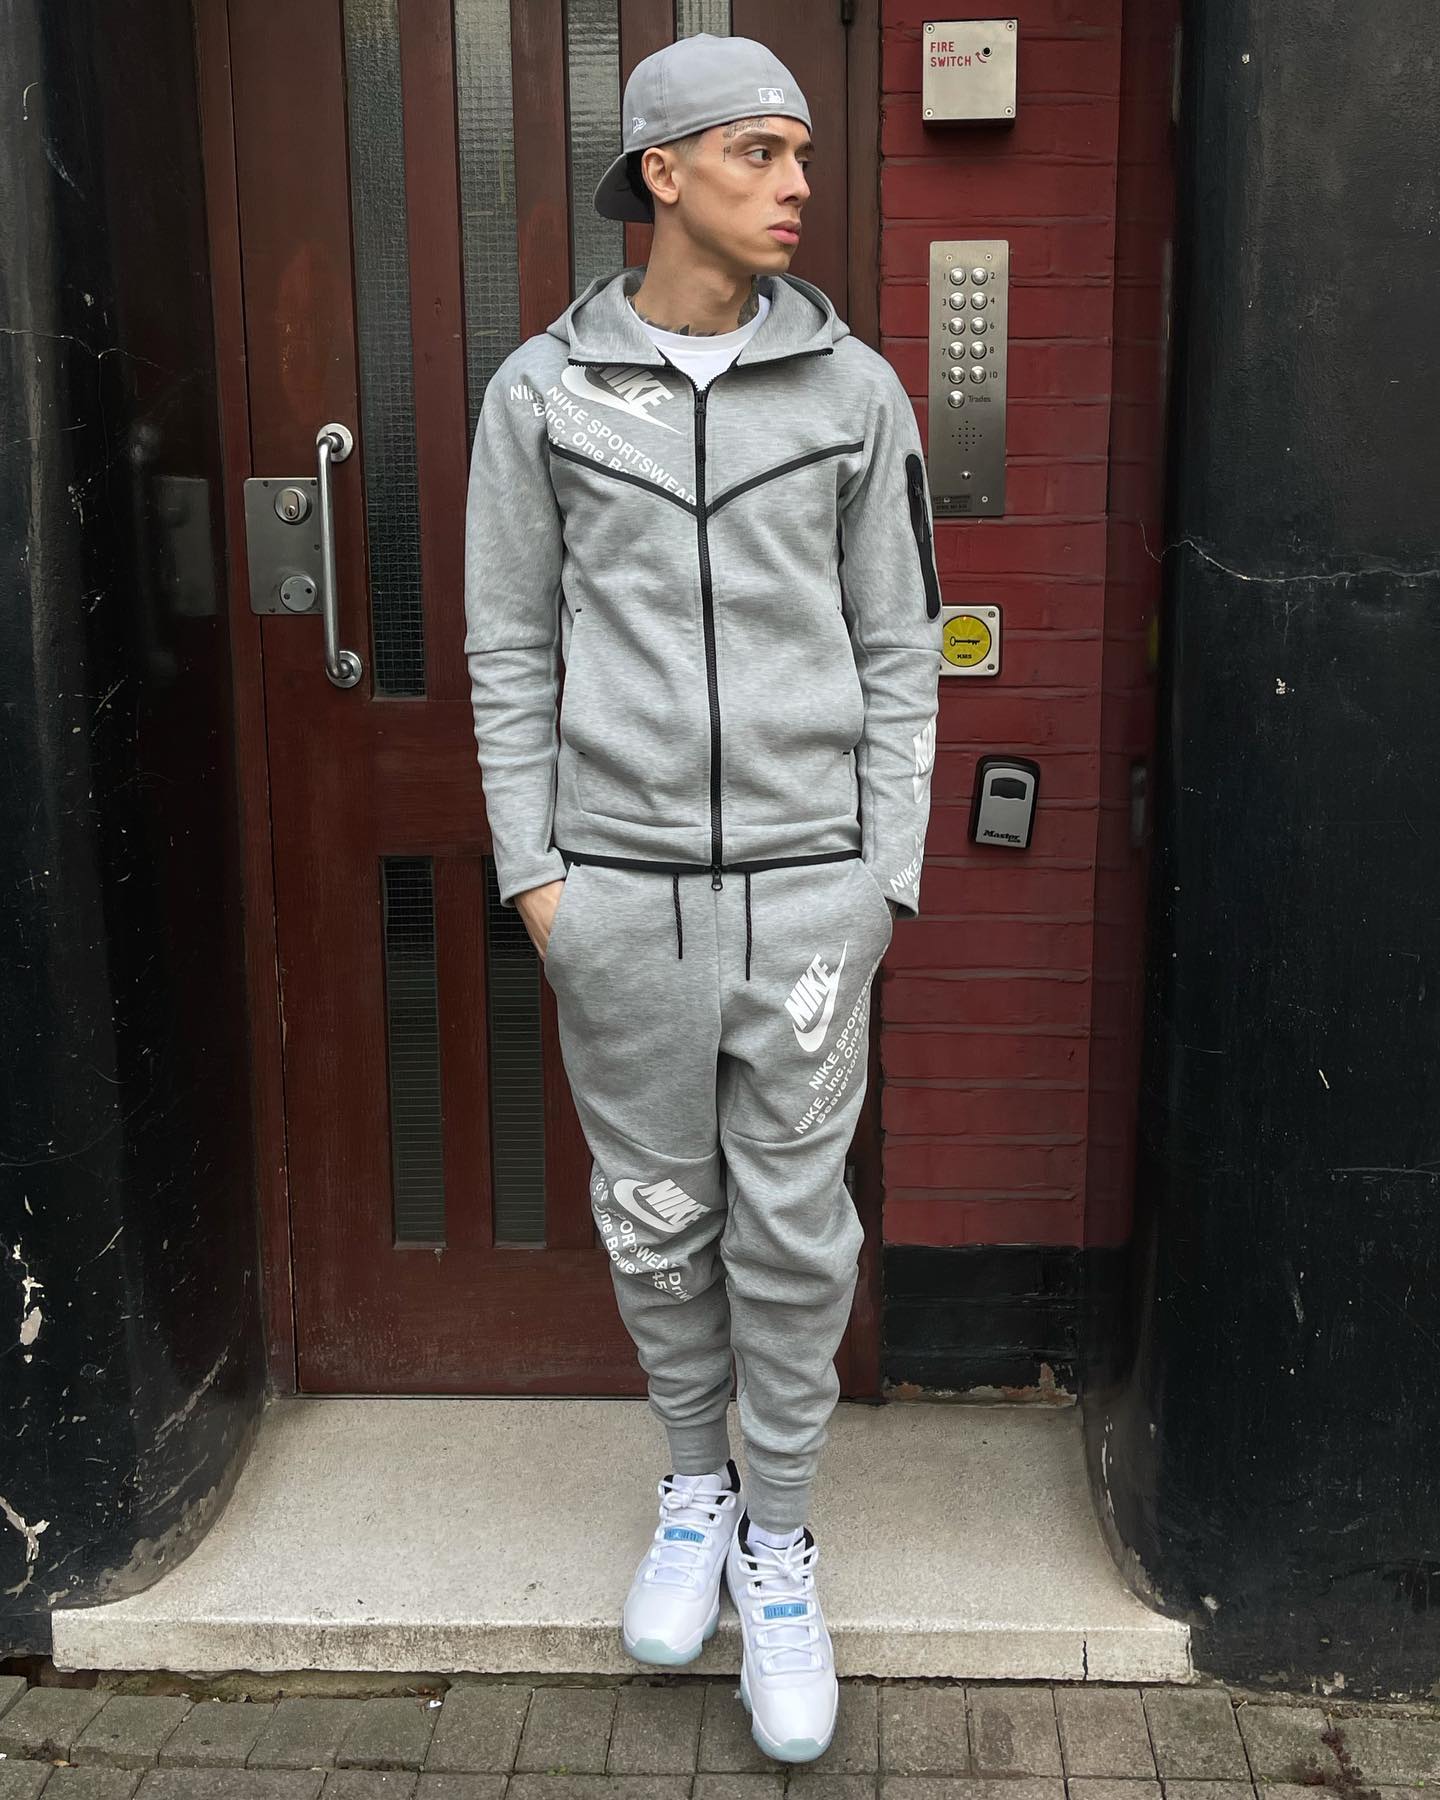 Sneaker Myth on Twitter: "ad: The Nike Tech Fleece Graphic Print Tracksuits  Are Now In Stock Here! Nike &gt;&gt; https://t.co/EWWVekKPhB Footlocker  &gt;&gt; https://t.co/R4LYKC5E3d JD Sports &gt;&gt; https://t.co/KfCPNk28bH  https://t.co/vtClkCFwDn ...